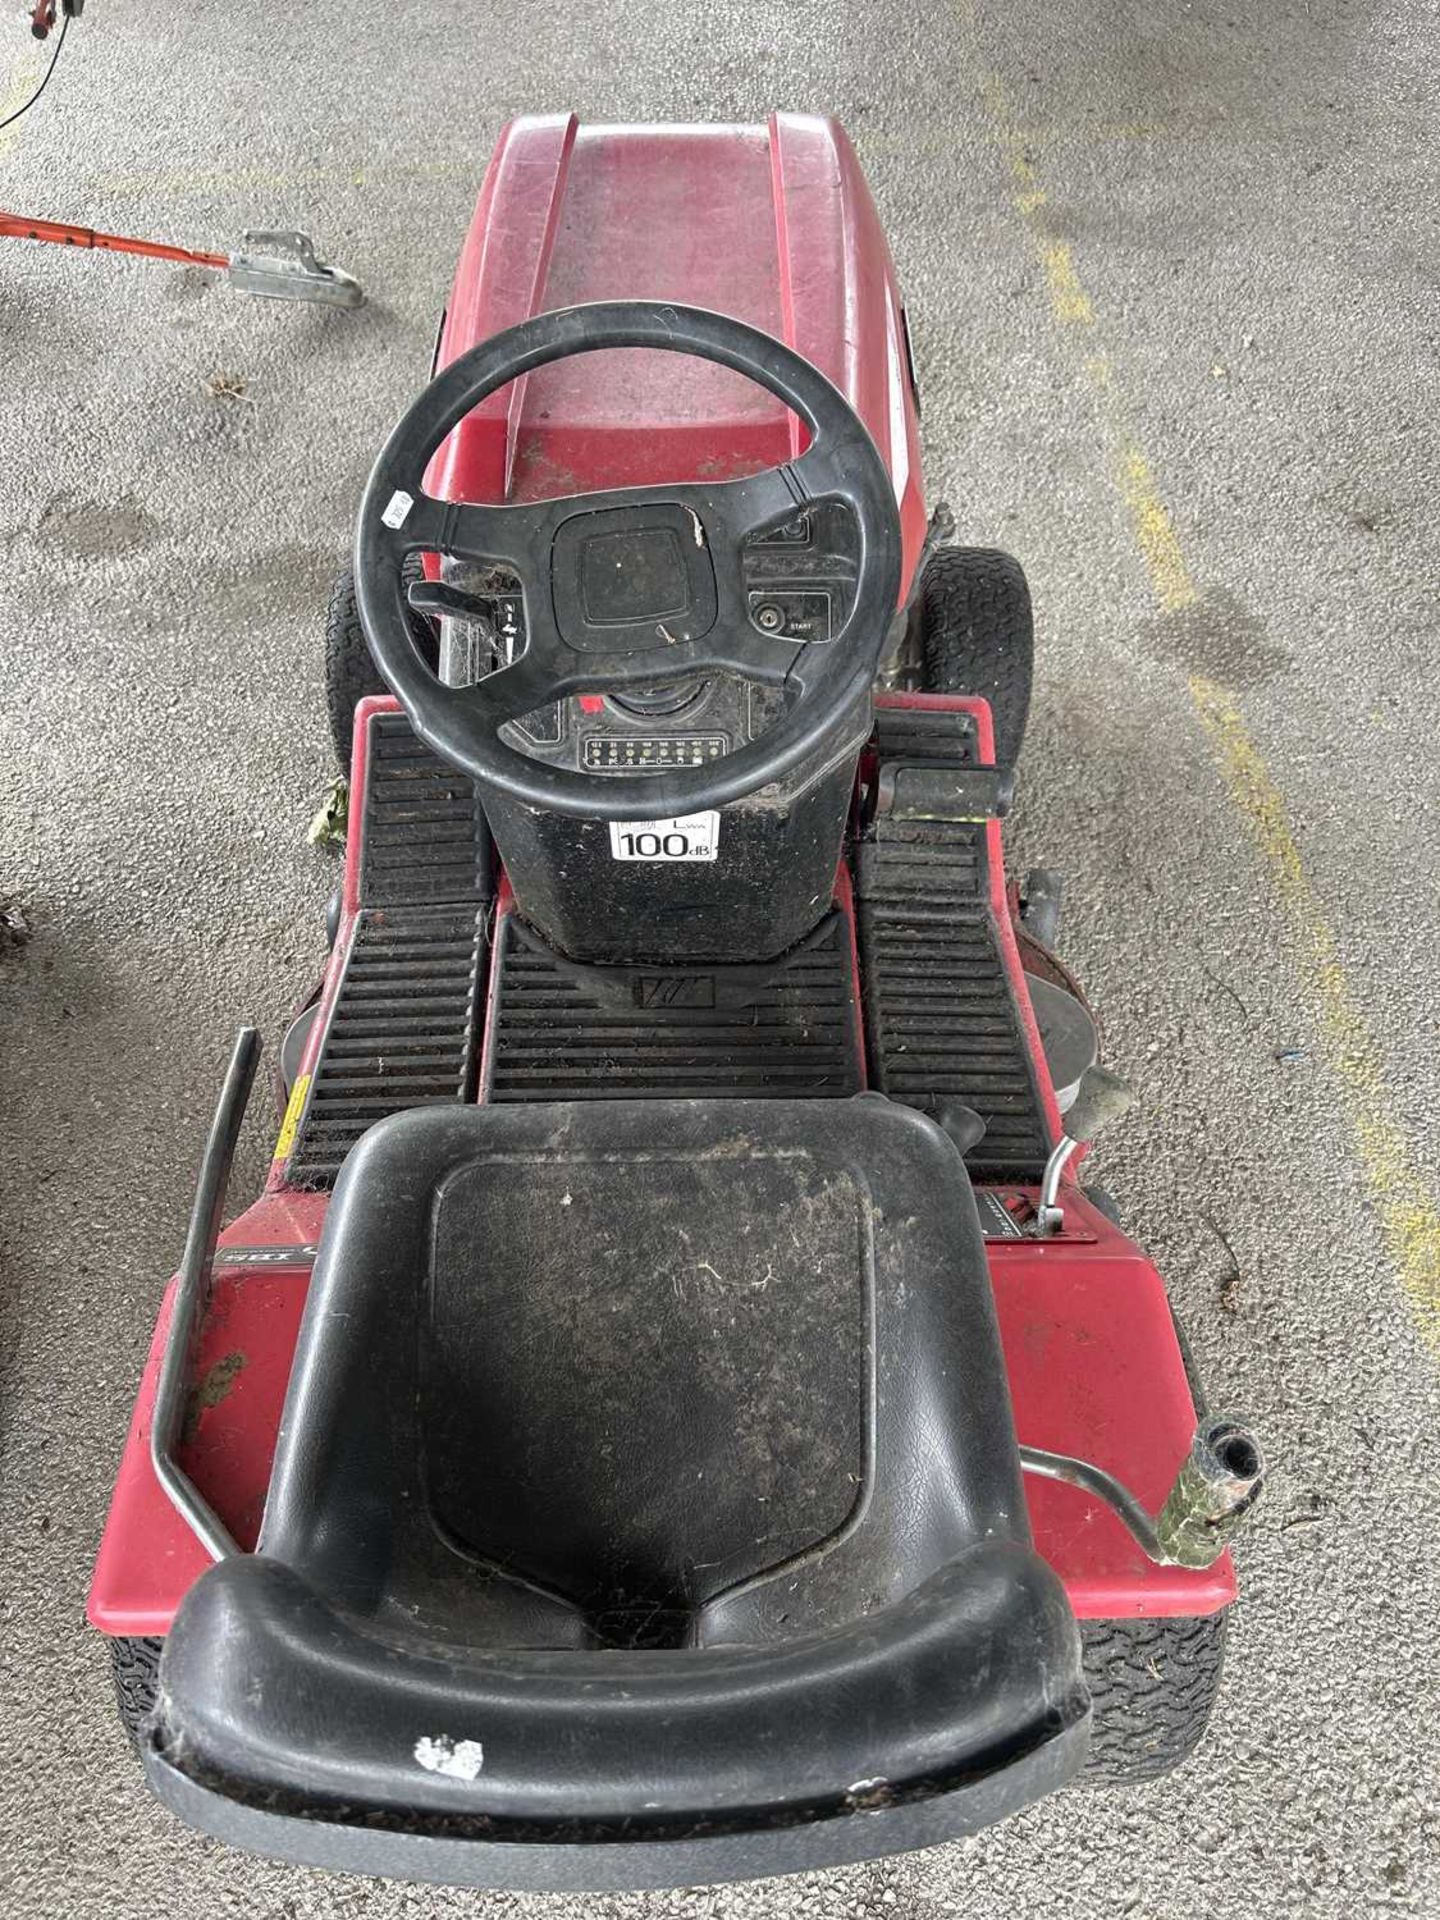 S1300 ride on lawnmower - Image 4 of 4